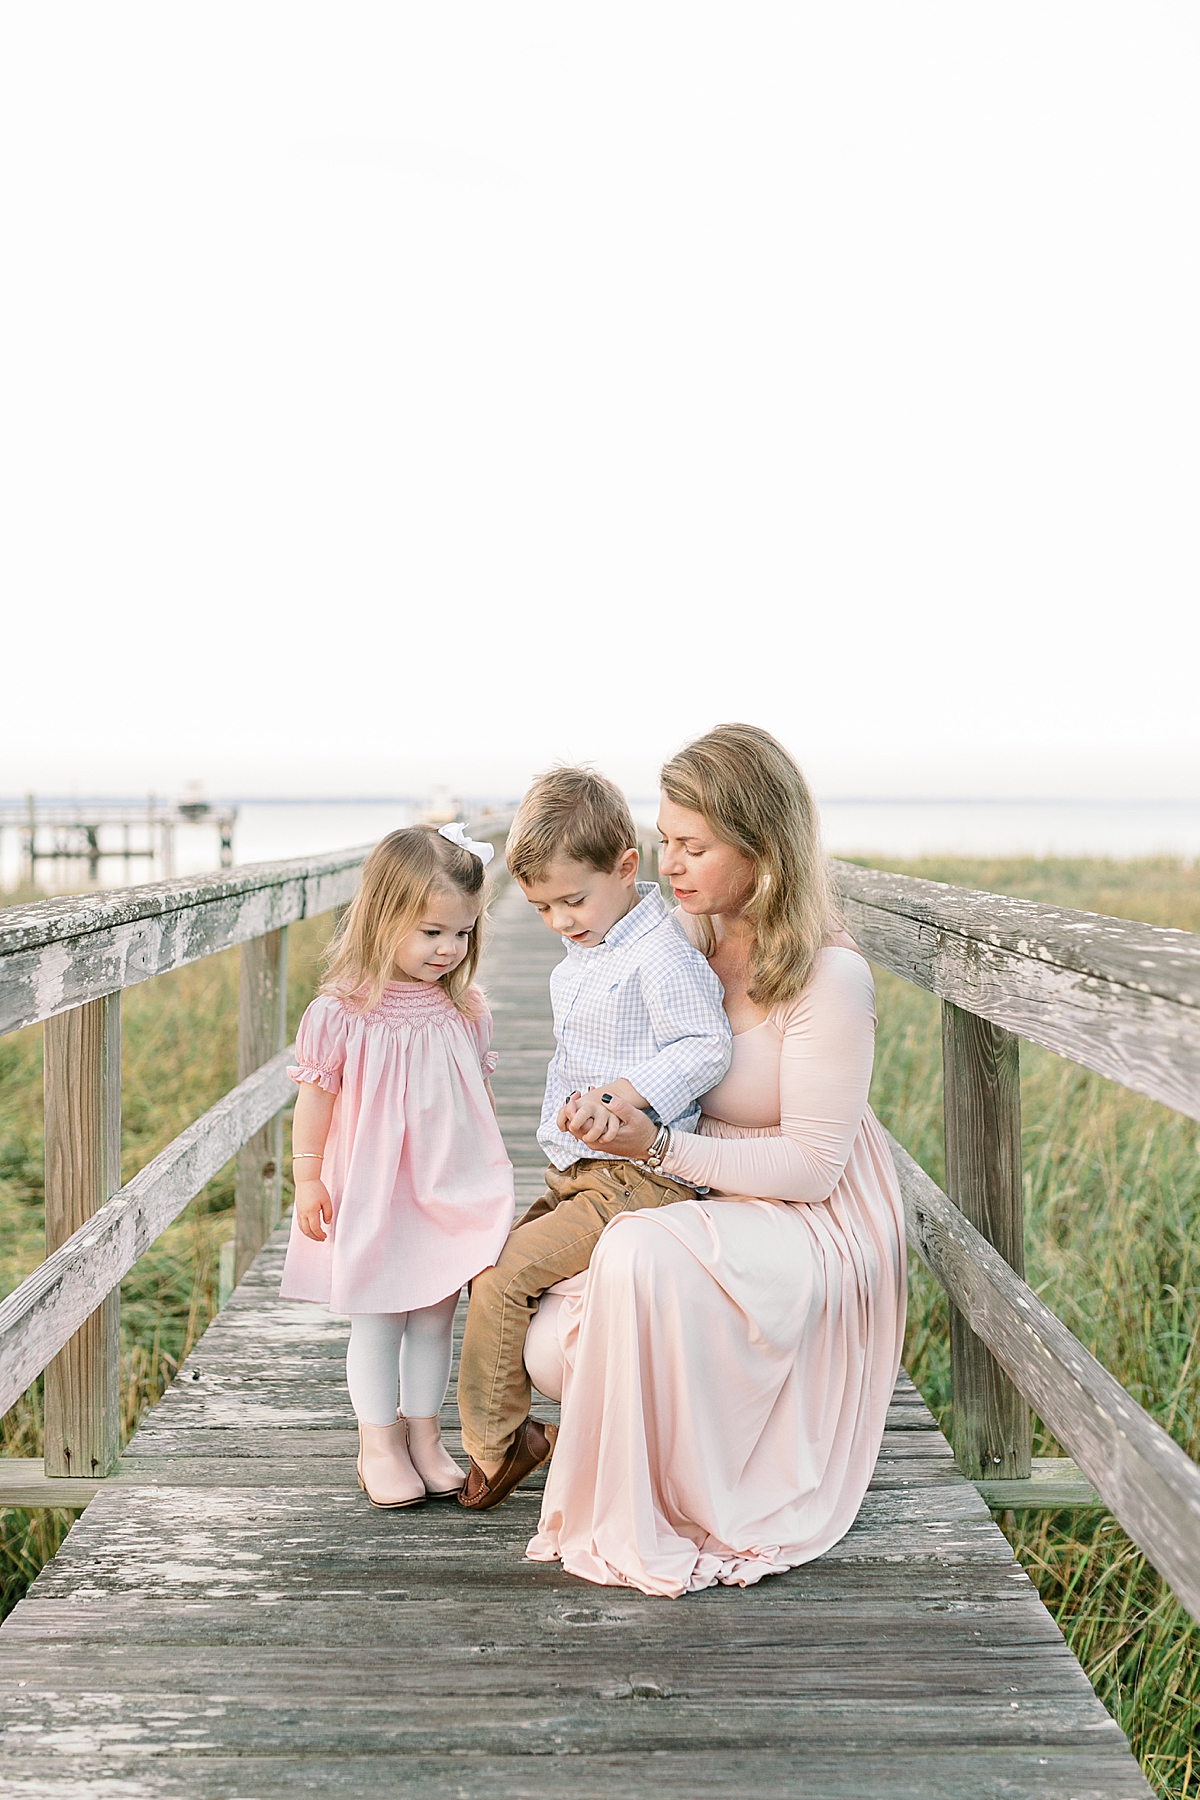 Mom with kids on the dock during family photoshoot. Photos by Mount Pleasant Family Photographer, Caitlyn Motycka Photography.